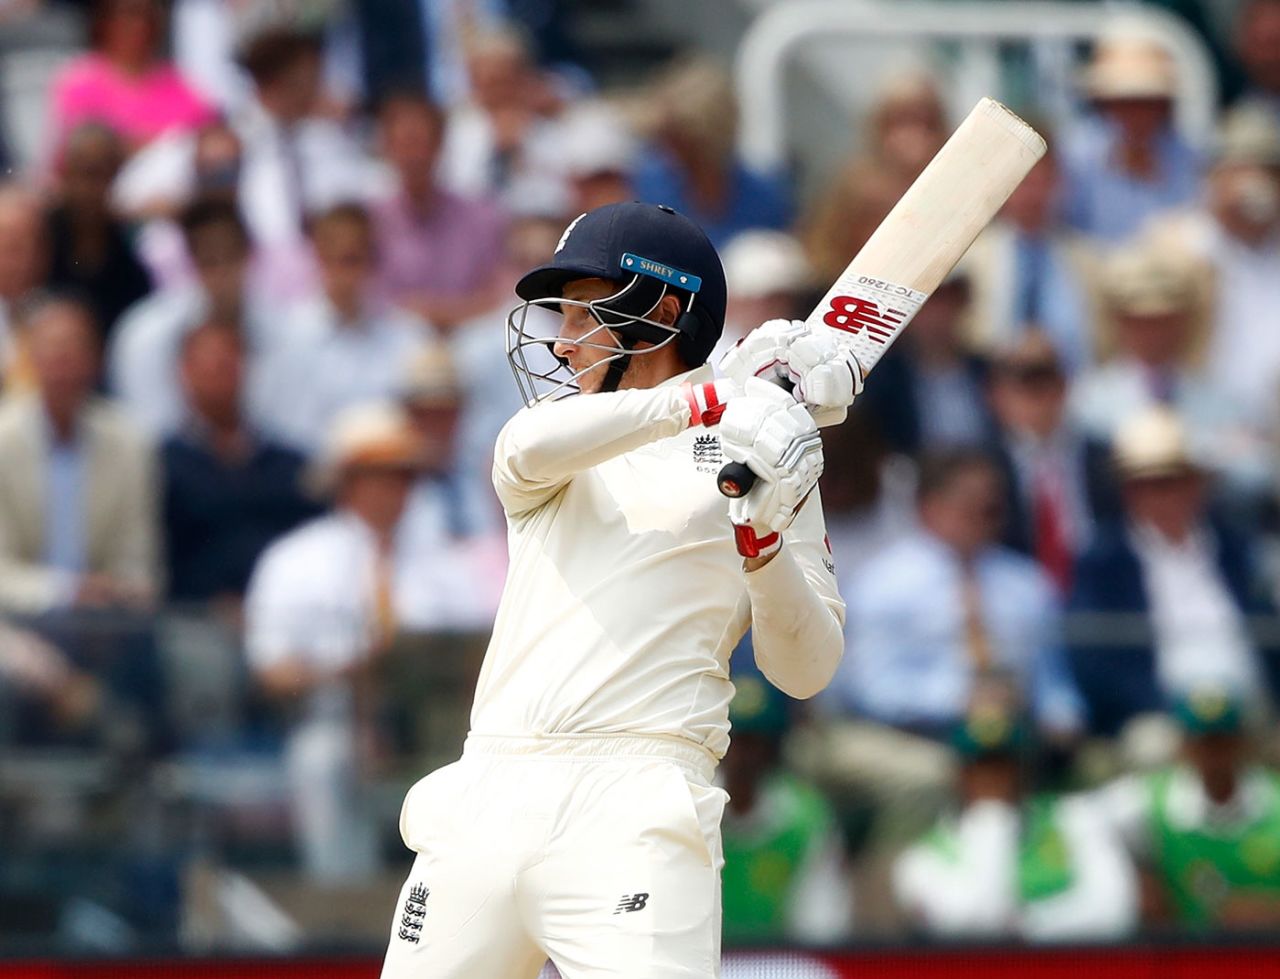 Joe Root leans back to cut, England v Pakistan, 1st Test, Lord's 3rd day, May 26, 2018